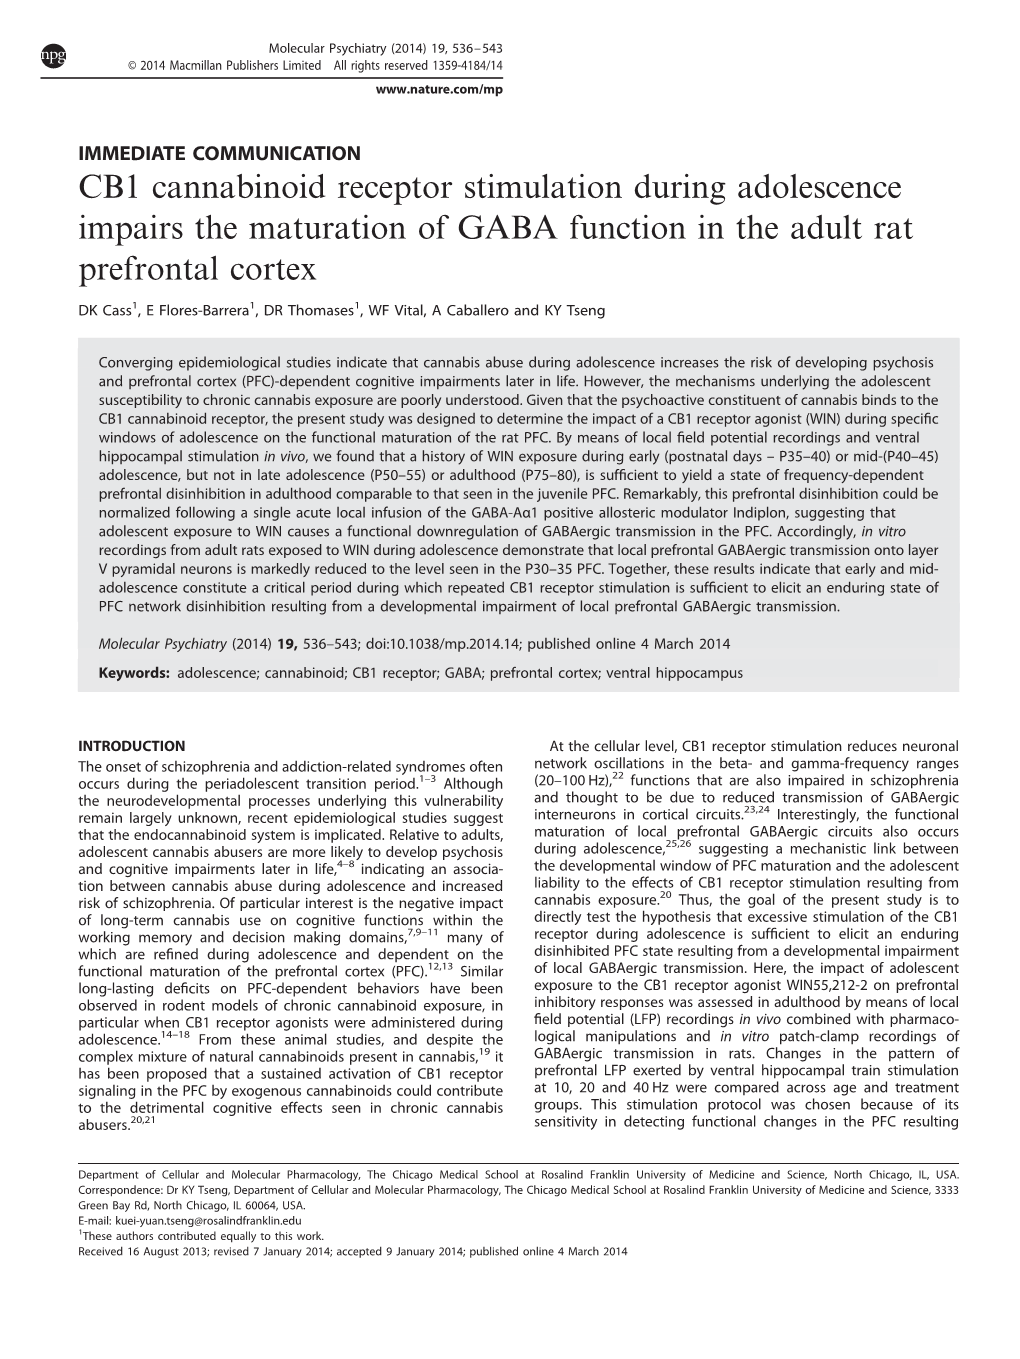 CB1 Cannabinoid Receptor Stimulation During Adolescence Impairs the Maturation of GABA Function in the Adult Rat Prefrontal Cortex